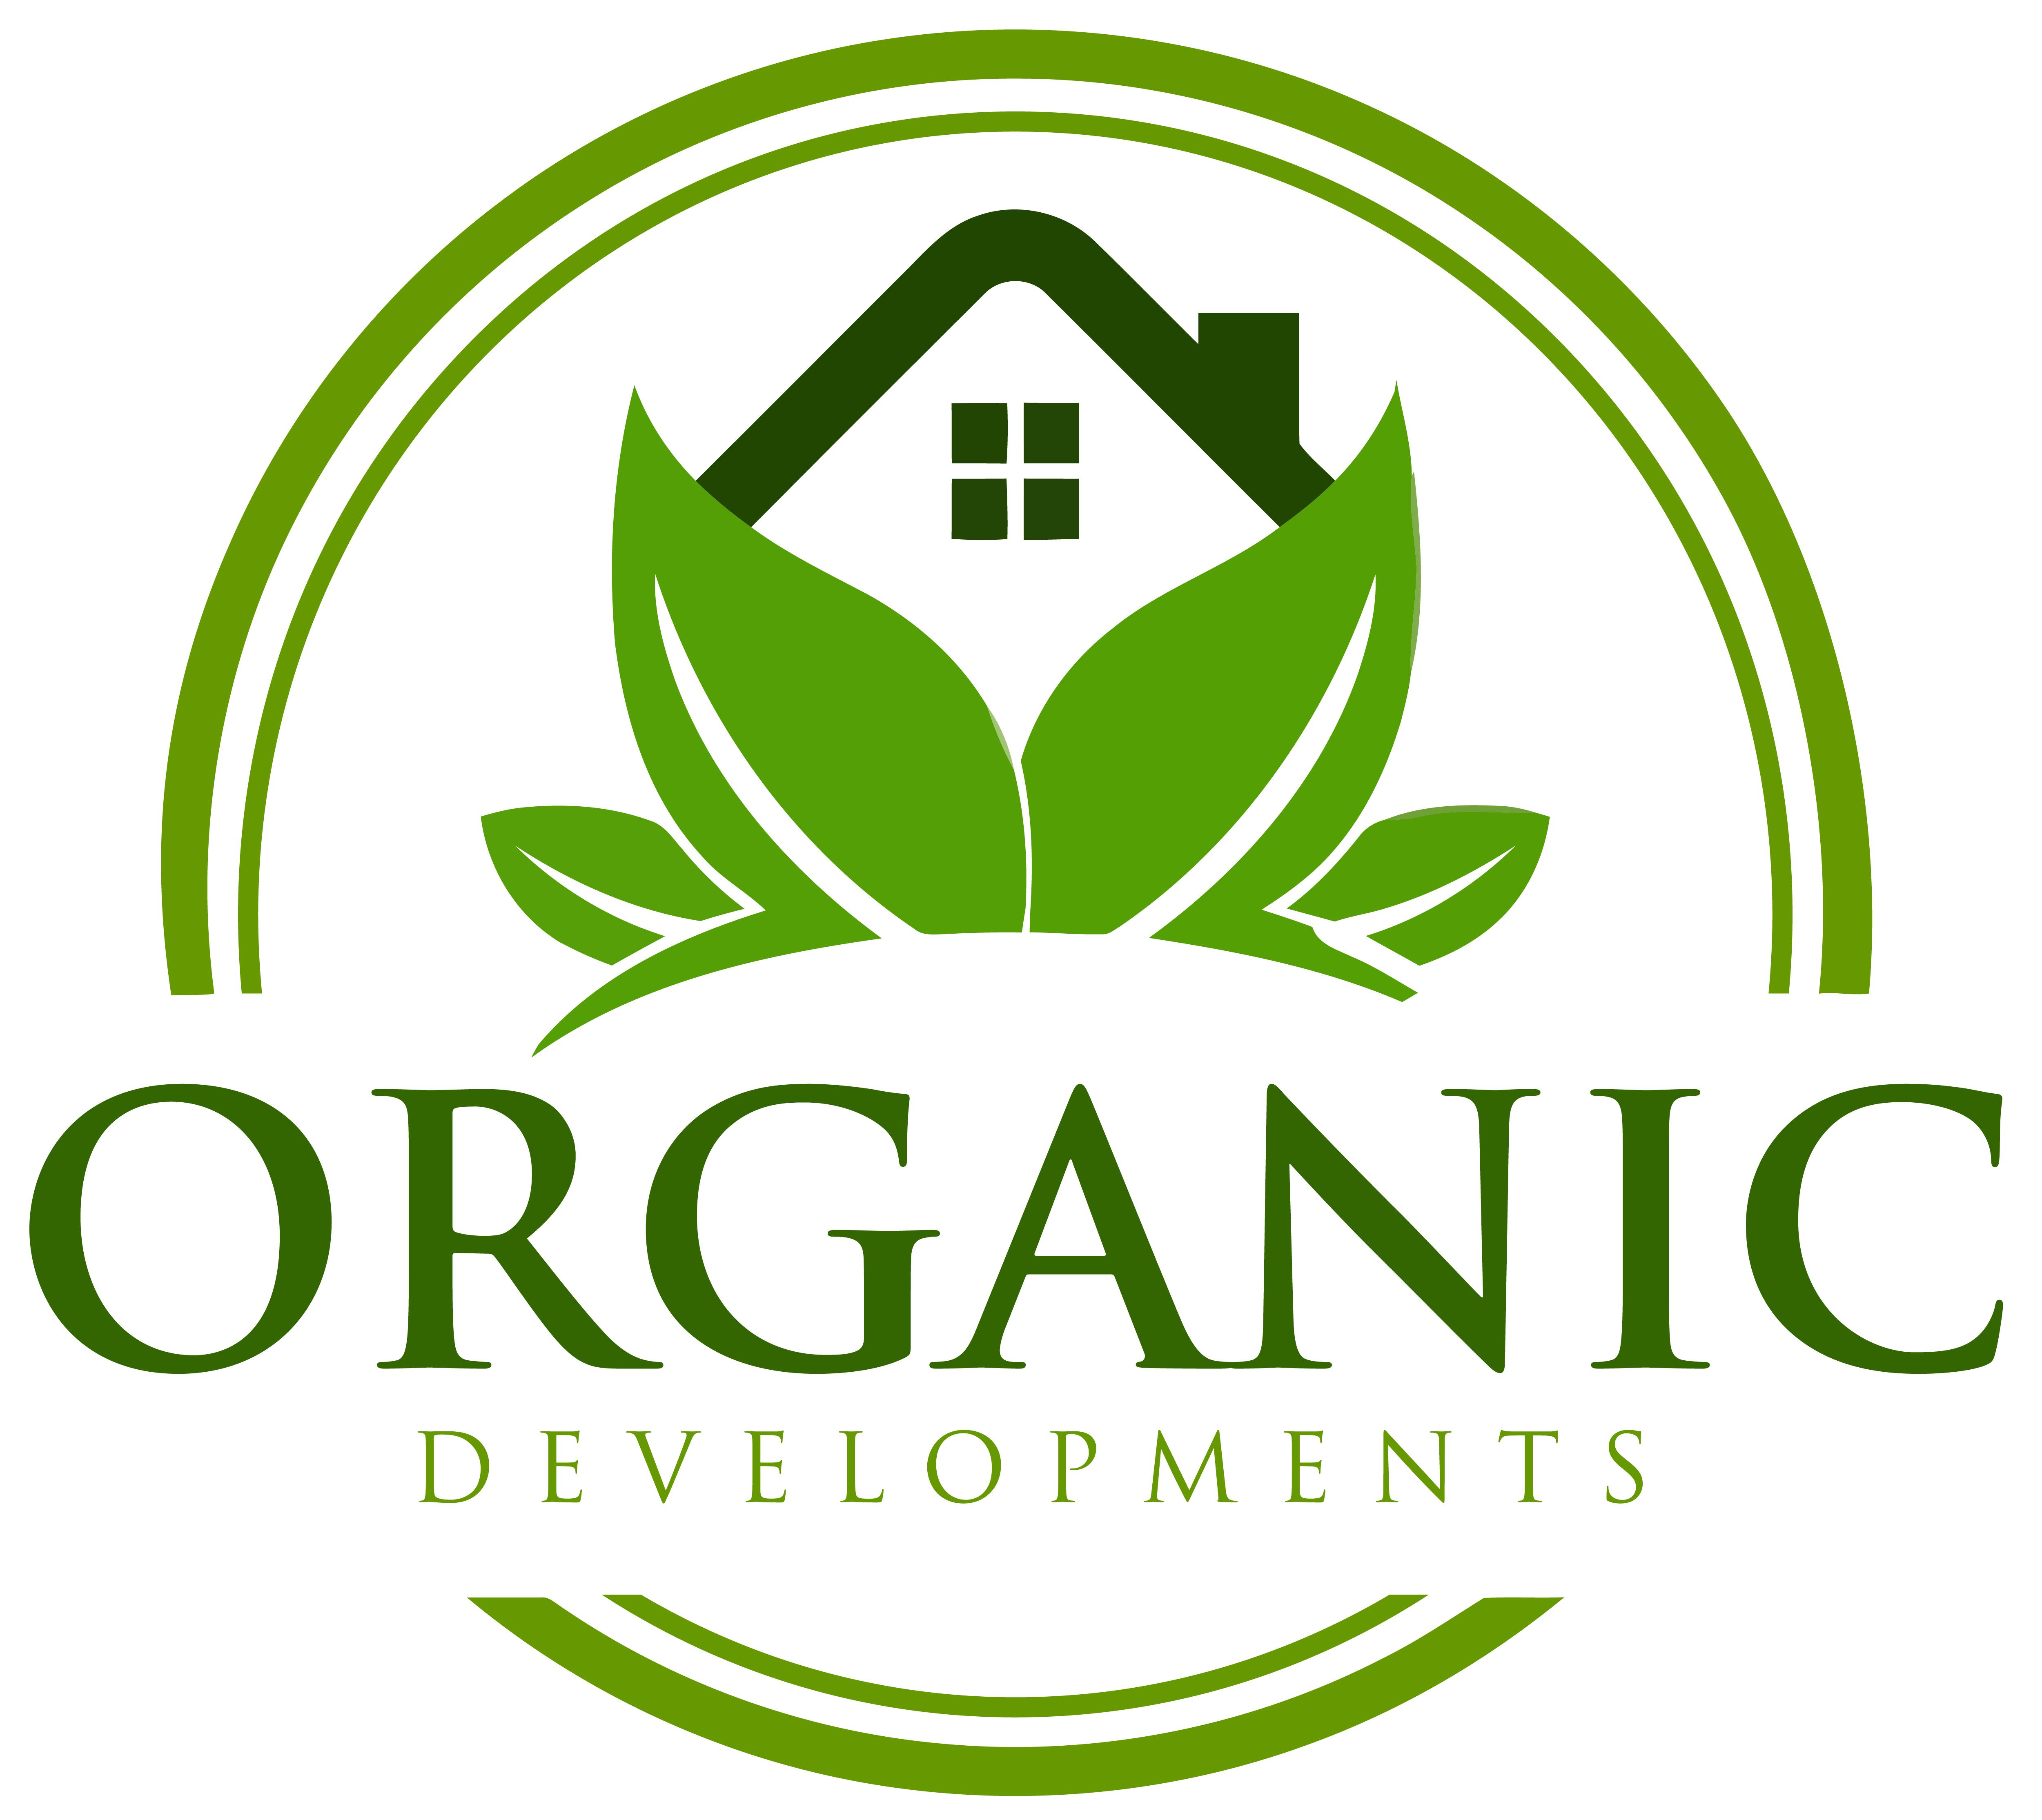 Organic Developments logo showing a home sprouting from some green leaves and the company name in green text